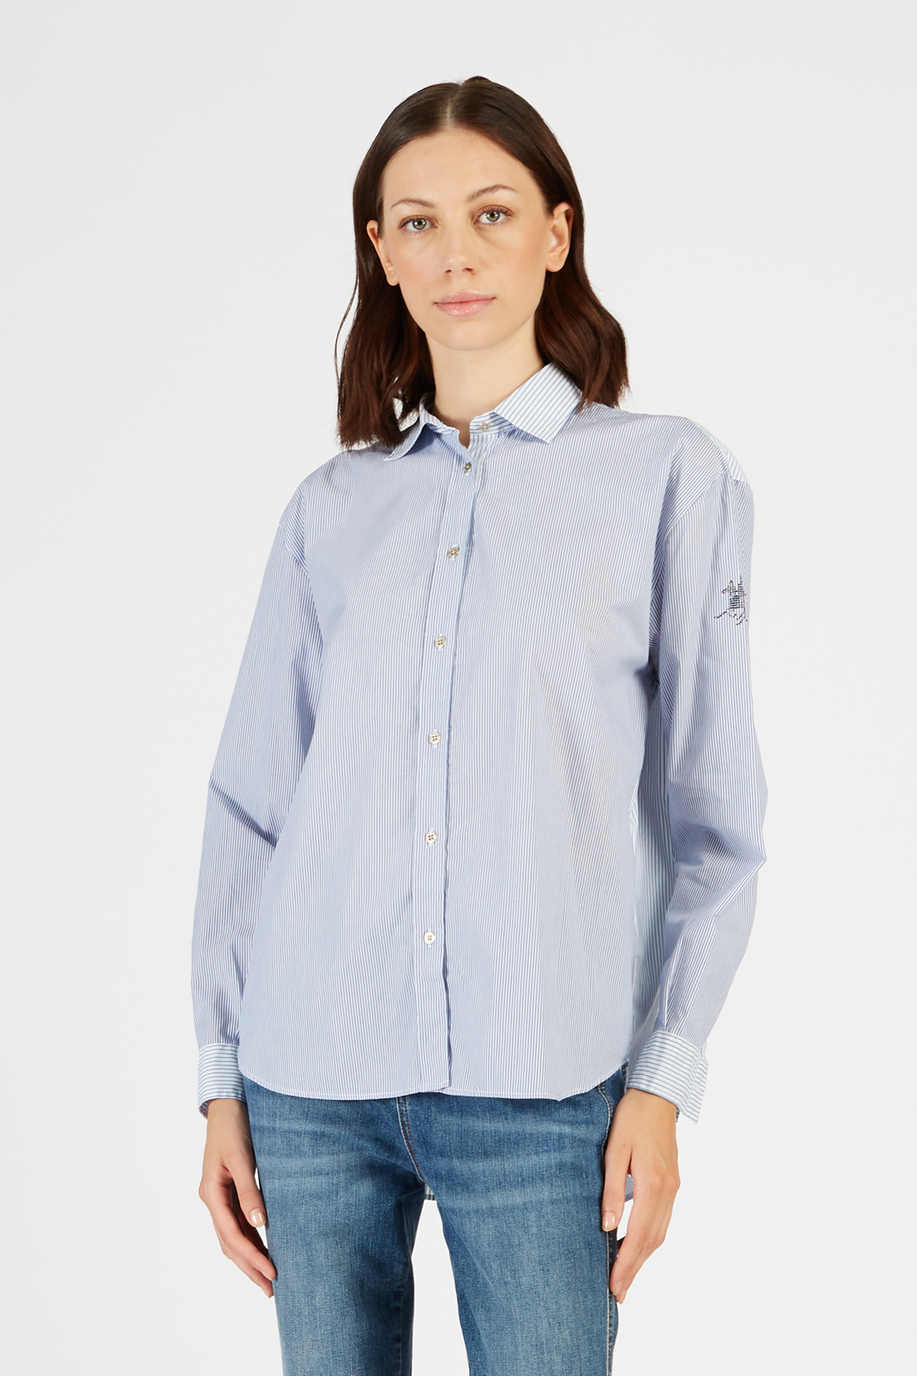 Women’s Timeless Striped Cotton Shirt Long Sleeves Regular fit - Gifts under €150 for her | La Martina - Official Online Shop